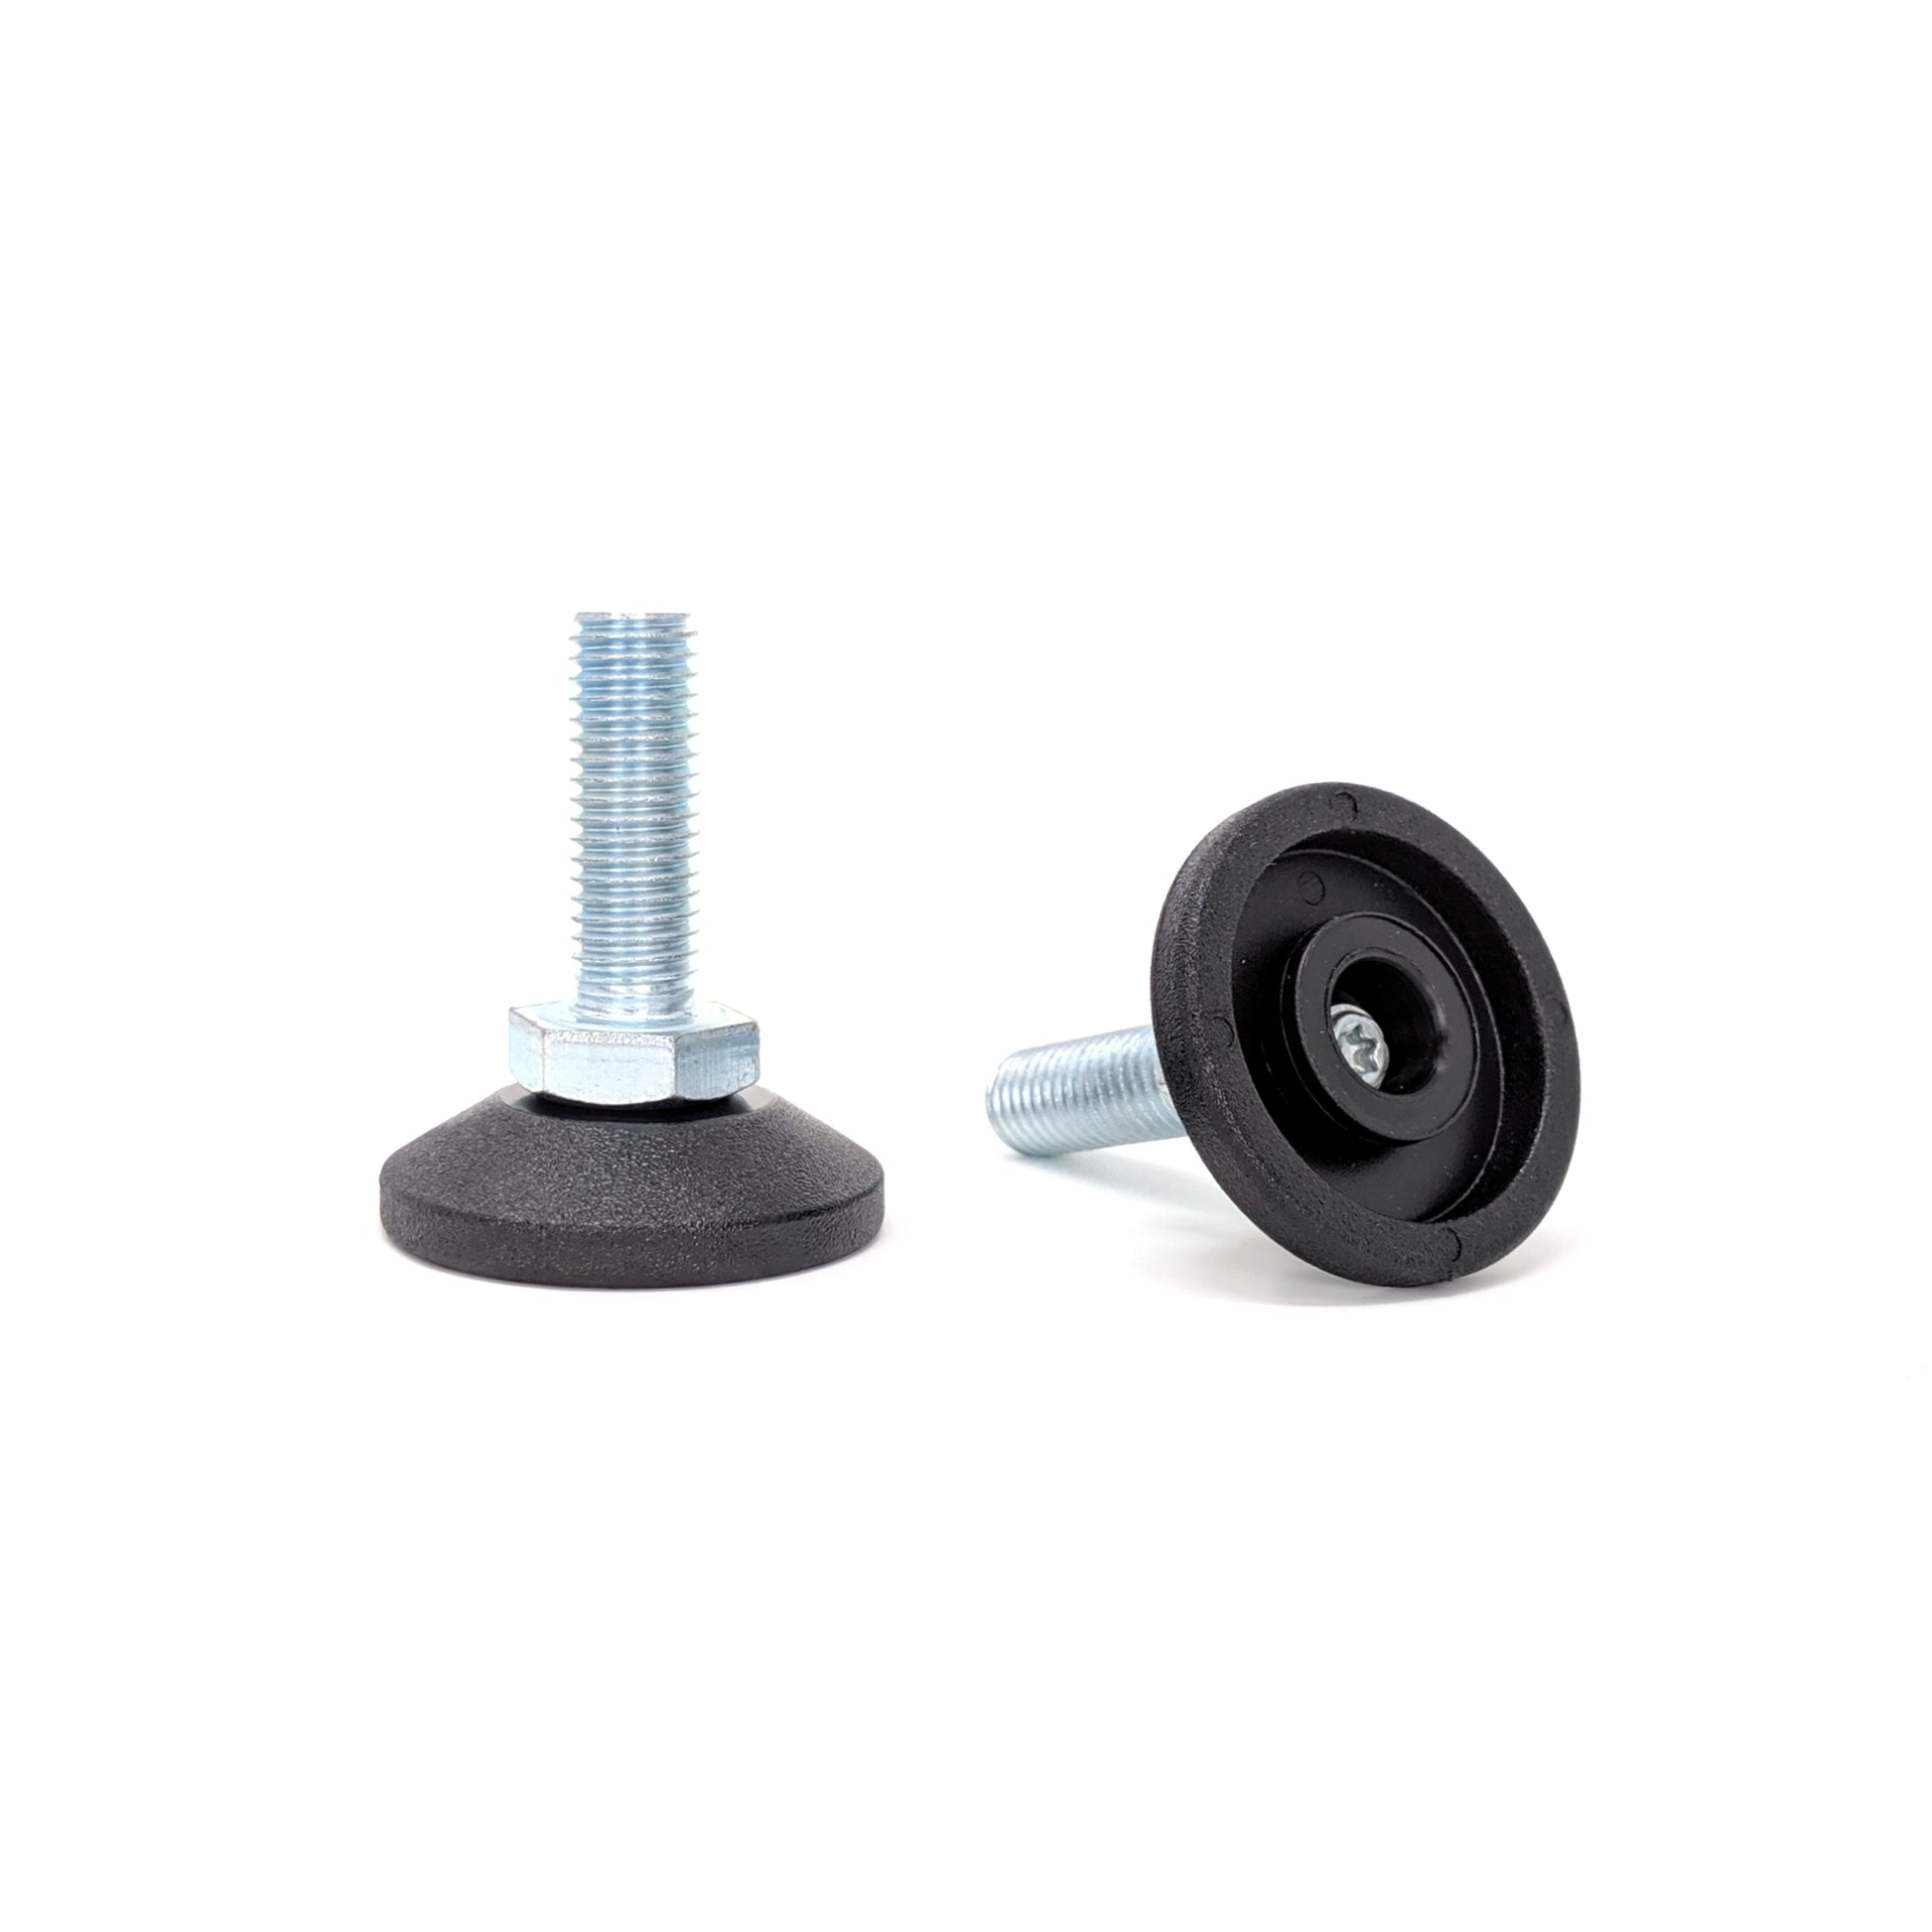 Adjustable Feet, 38mm Dia. Base, M10 30mm Thread, 550kg Static Load Capacity - Made In Germany - Keay Vital Parts